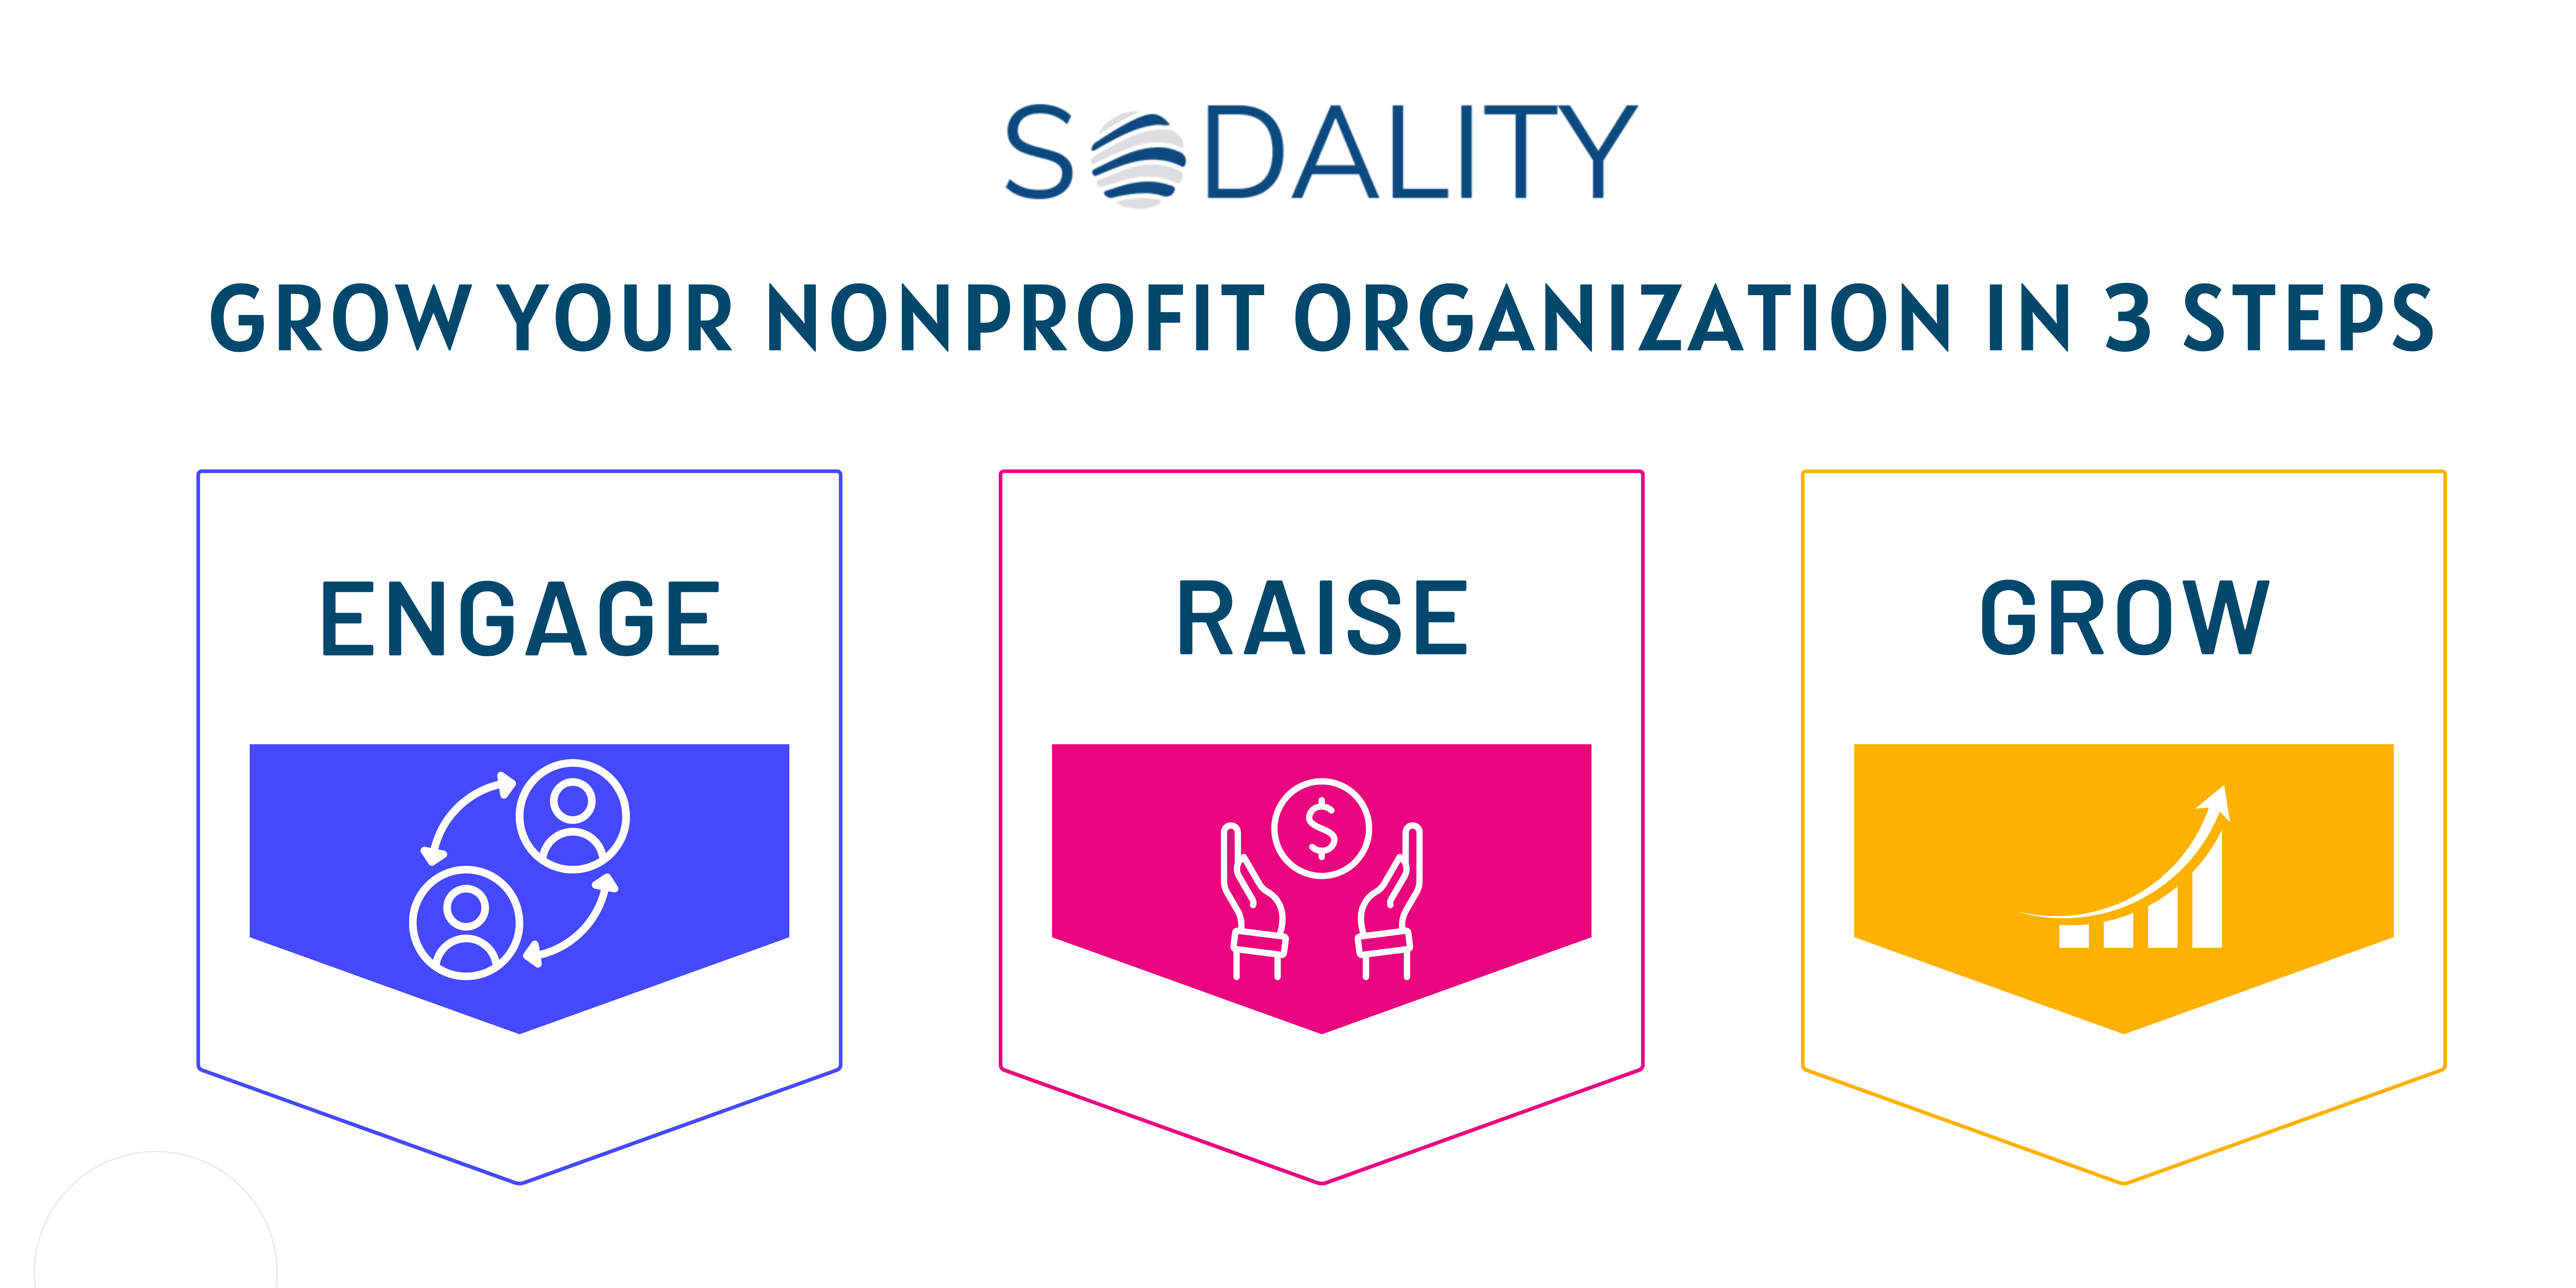 3 Steps to Grow Your Non-profit Organization